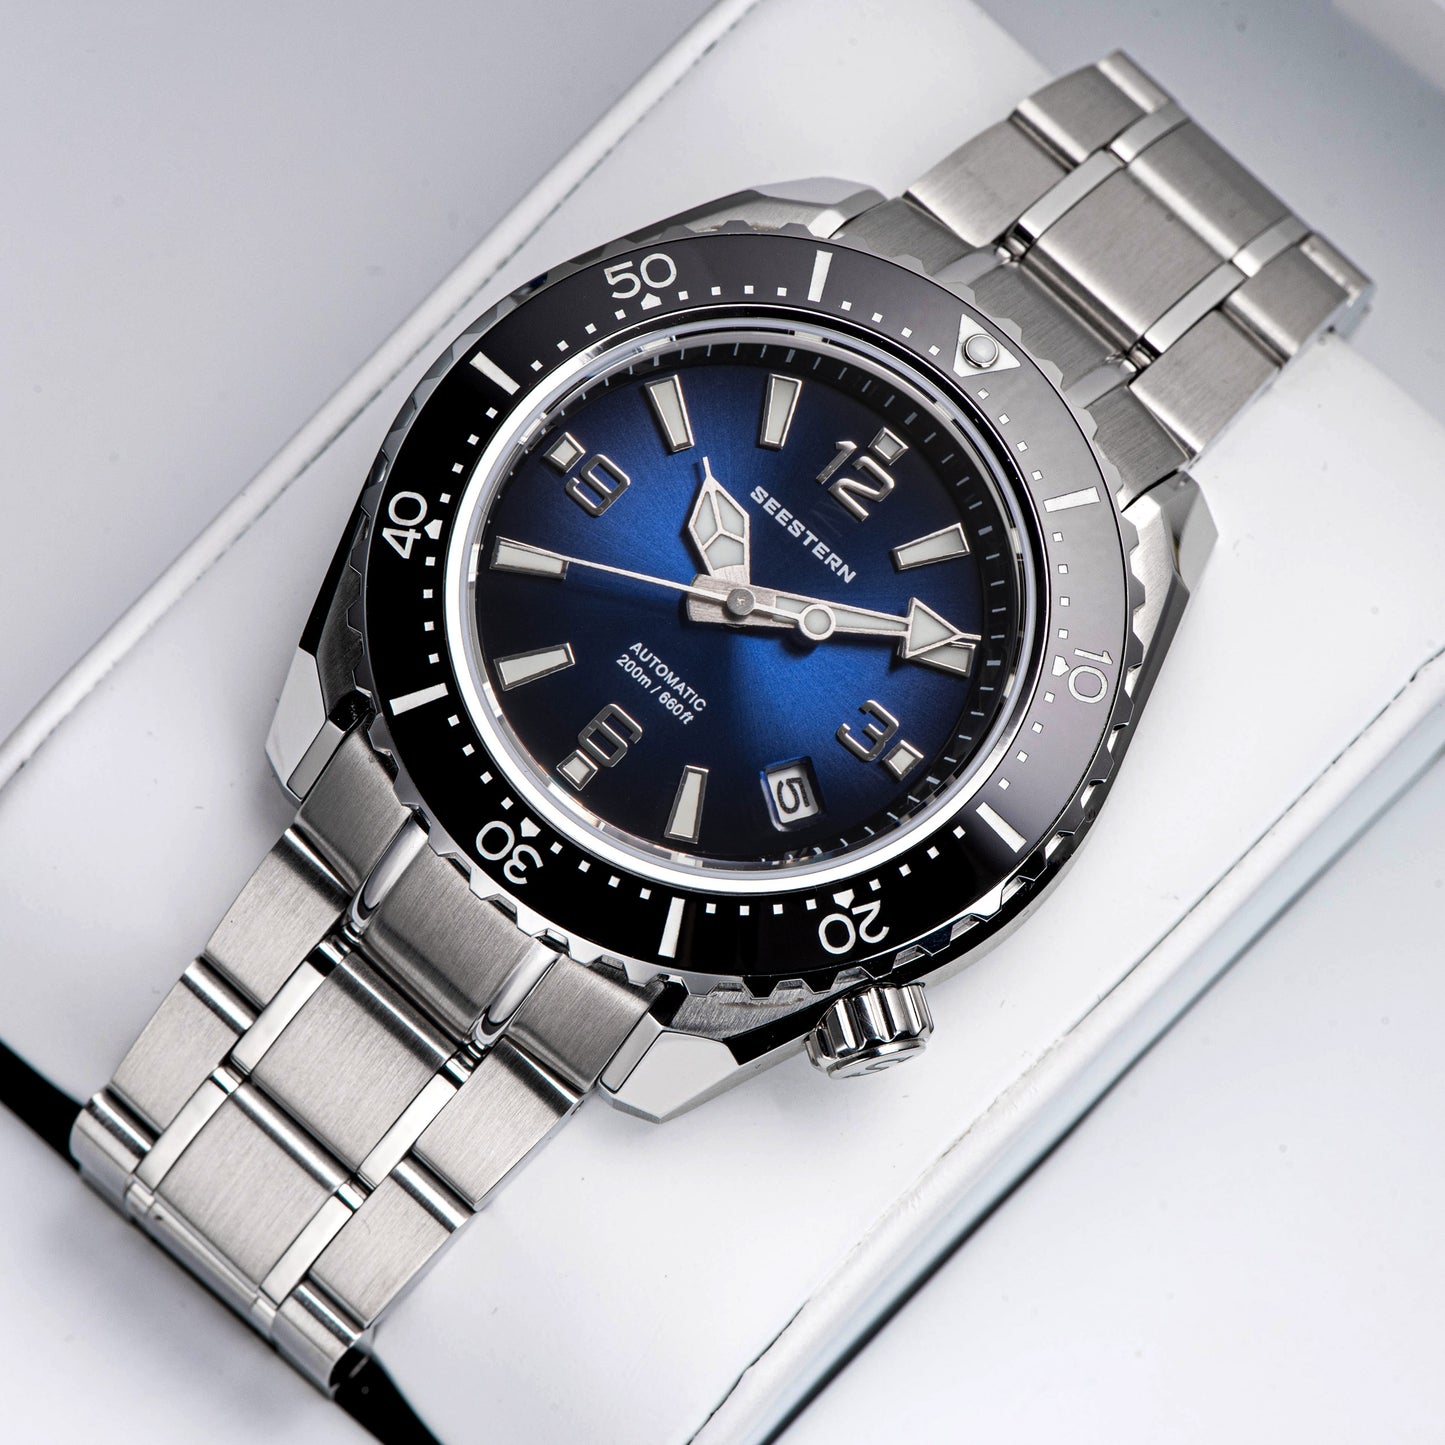 Seestern 416 Professional Diver Watch S416BL Blue Dial